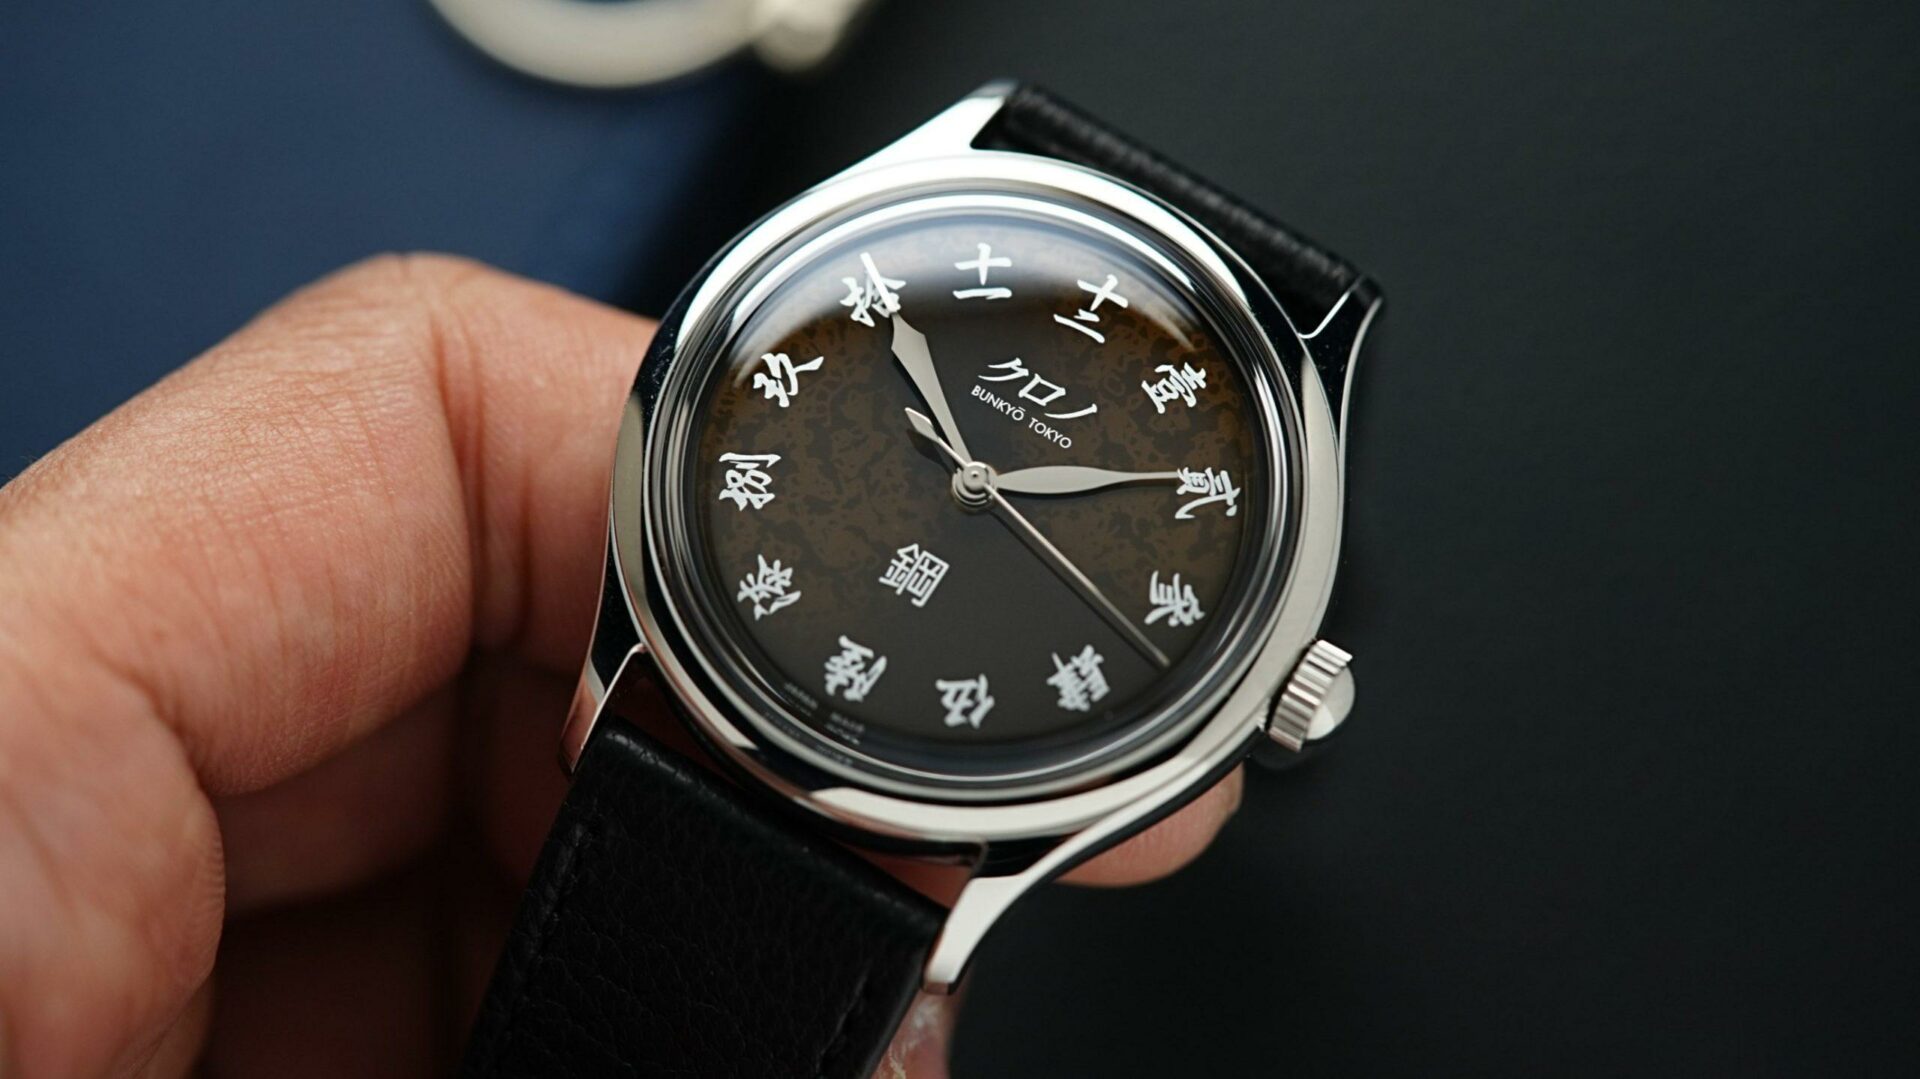 Kurono Tokyo Grand Hagane Limited being held and displayed in hand.